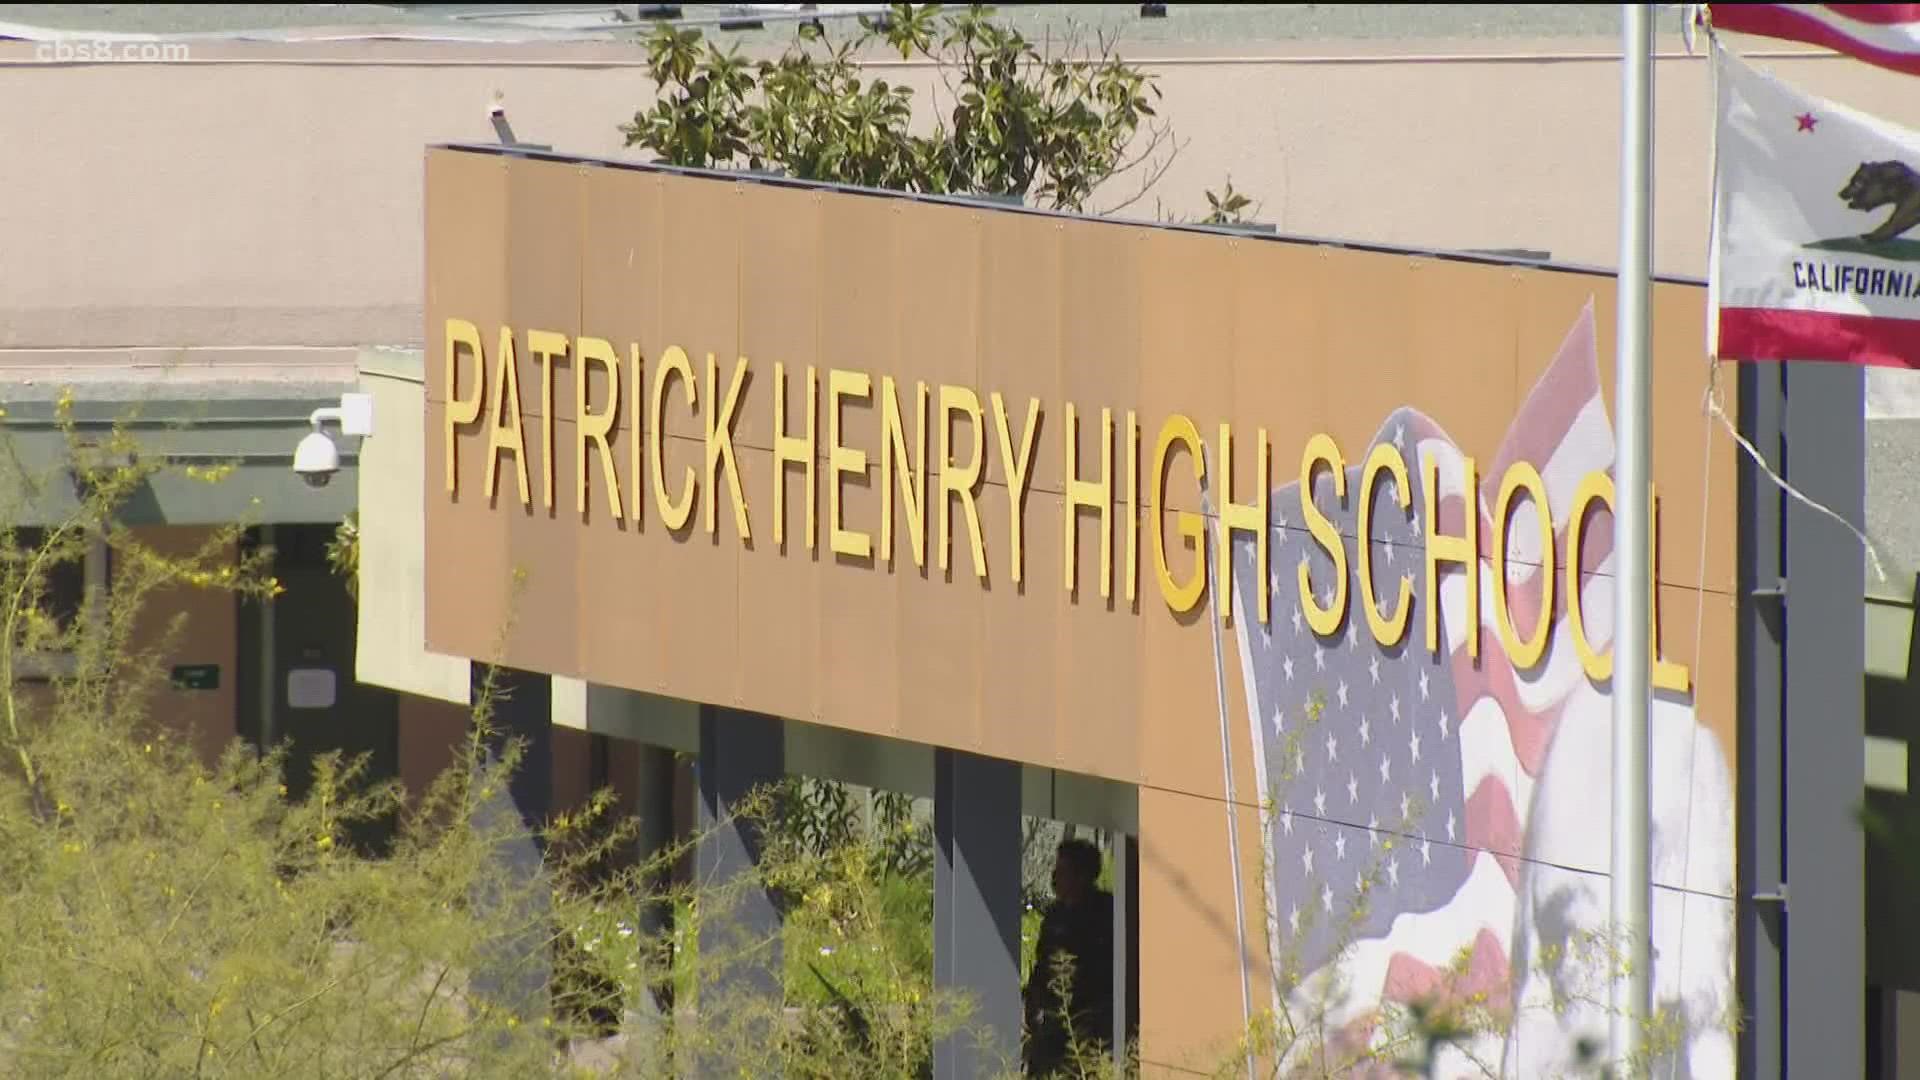 The first listening session for Patrick Henry High School parents went beyond the slated 1-hour time frame.